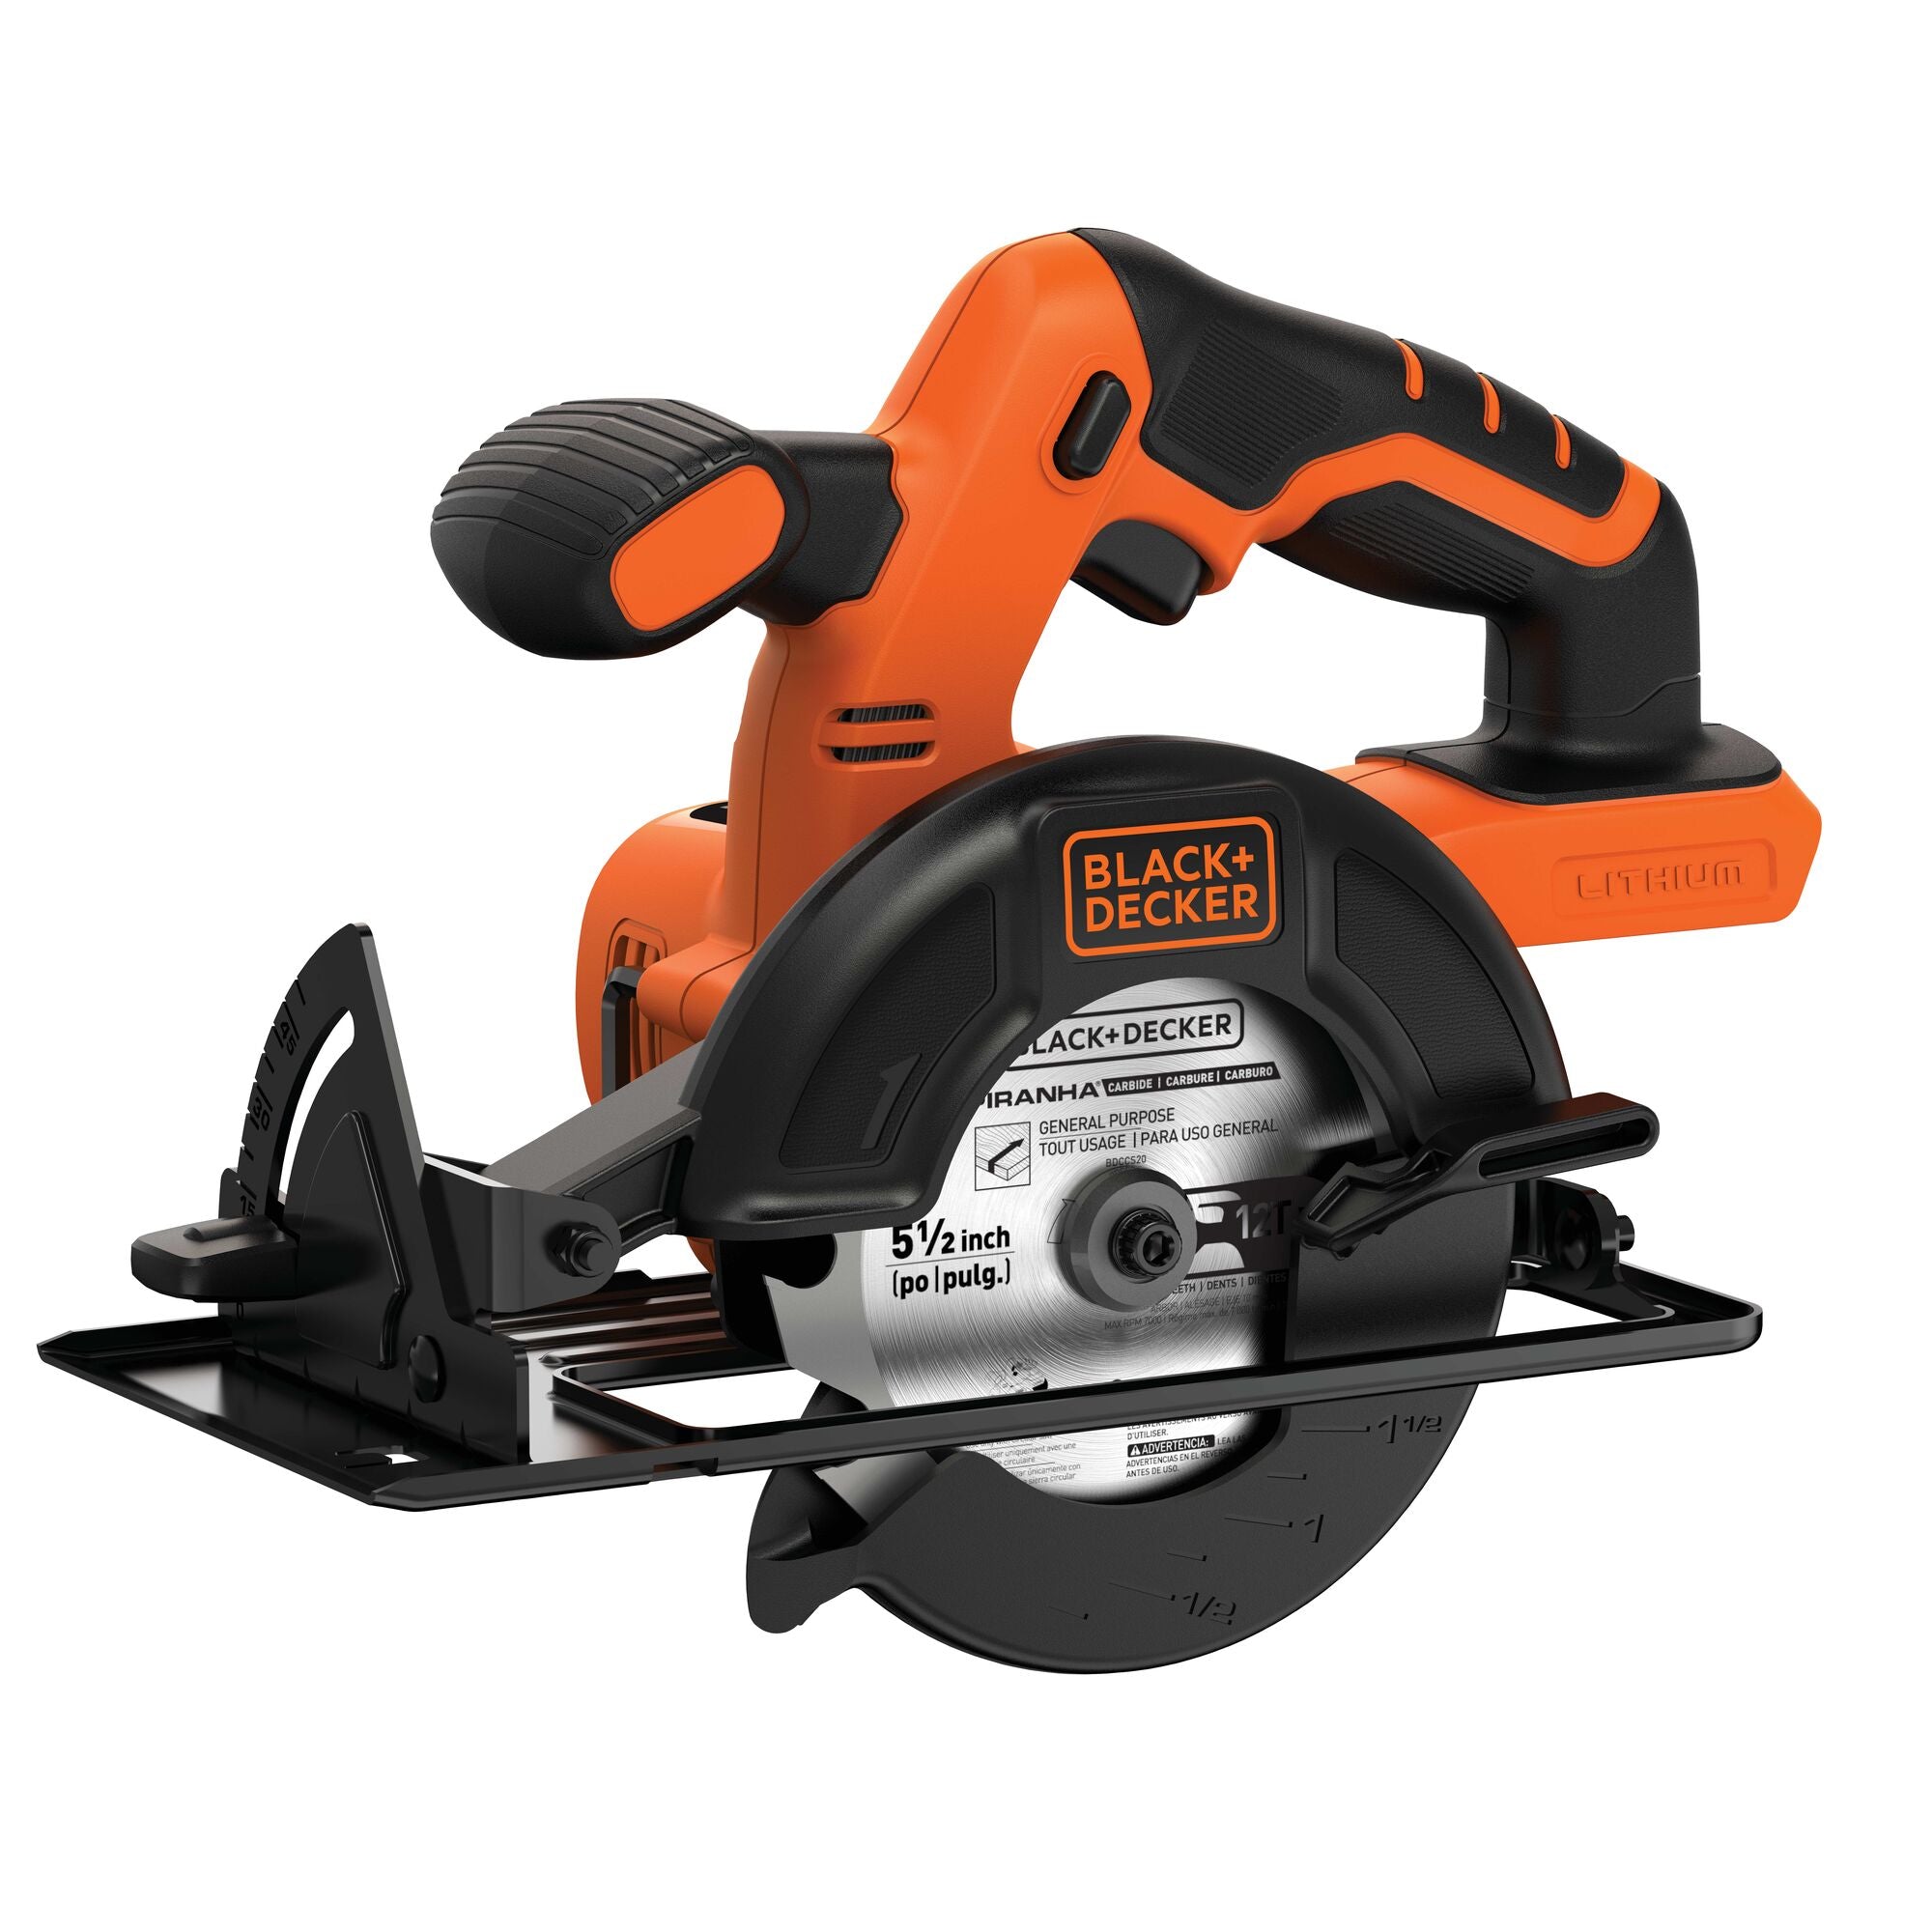 20V Cordless 6-1/2 in. Circular Saw - Tool Only